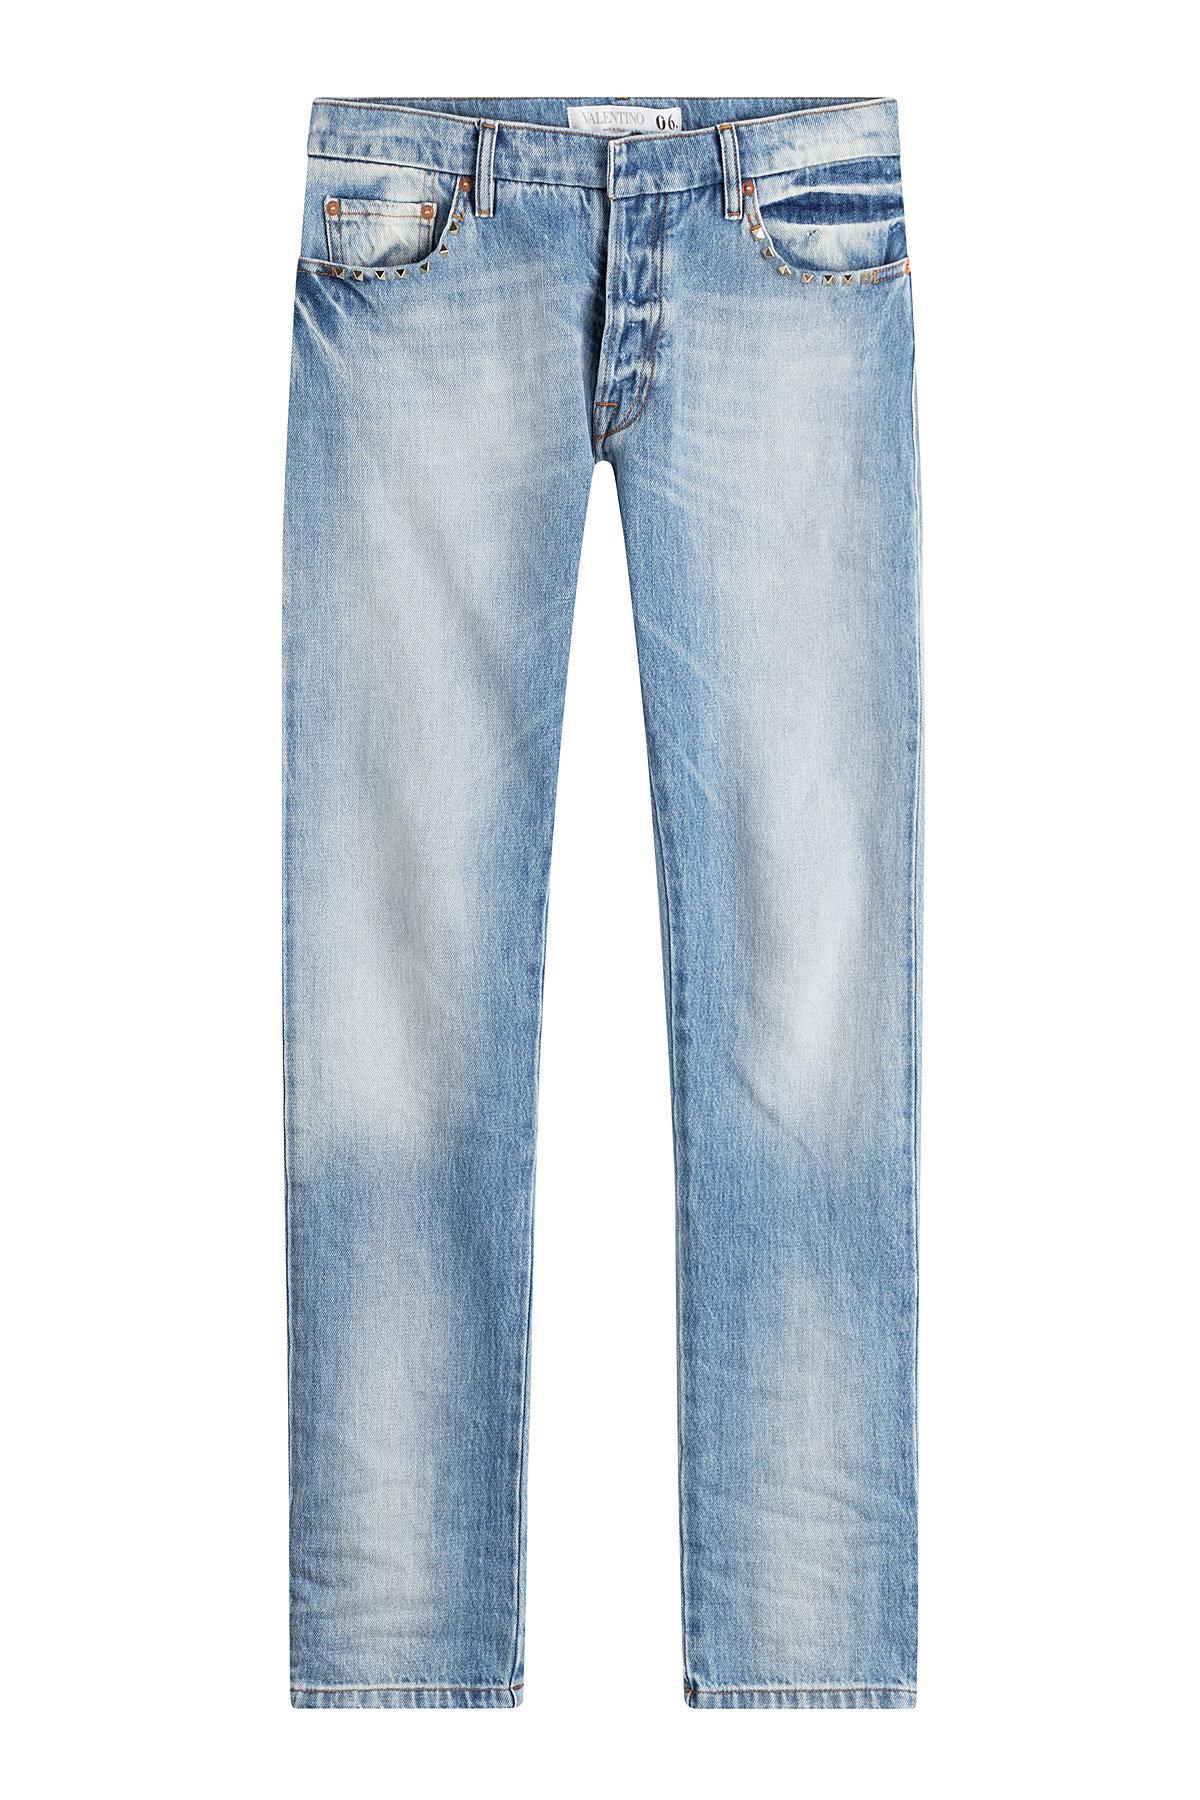 Valentino Rockstud Untitled Straight Leg Jeans in Blue for Men | Lyst